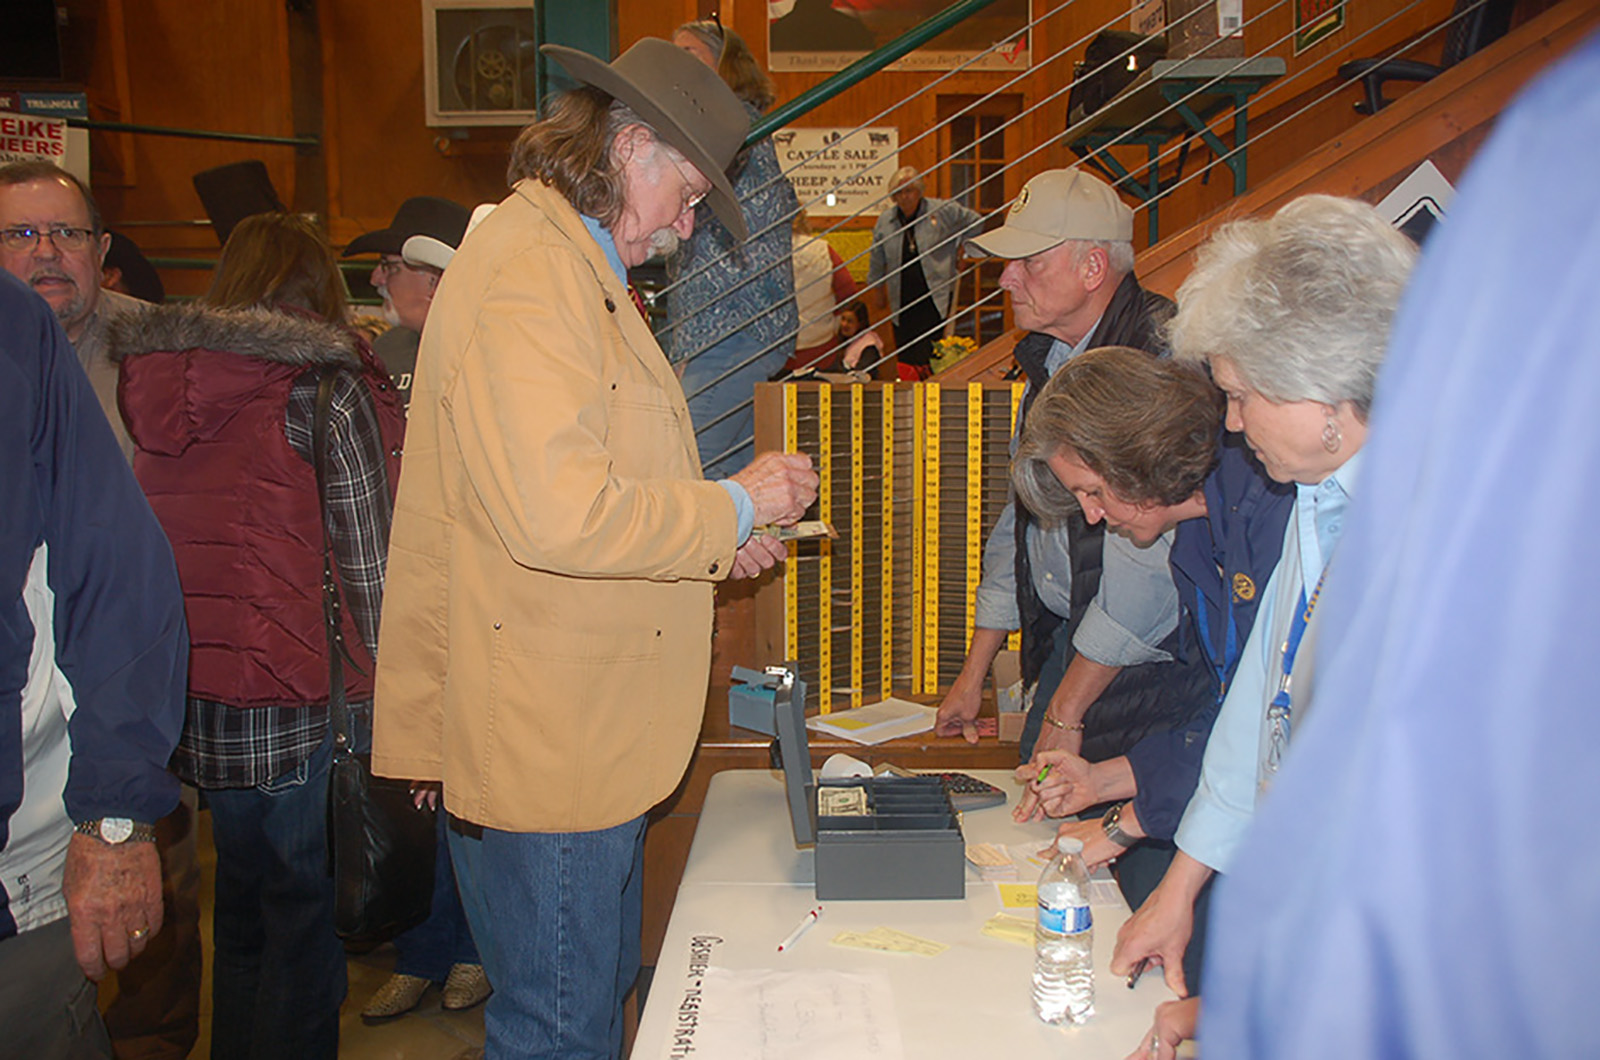 Colonel Littleton, wearing a tan jacket, blue jeans, and hat, is writing a check at the accounting table at an auction.